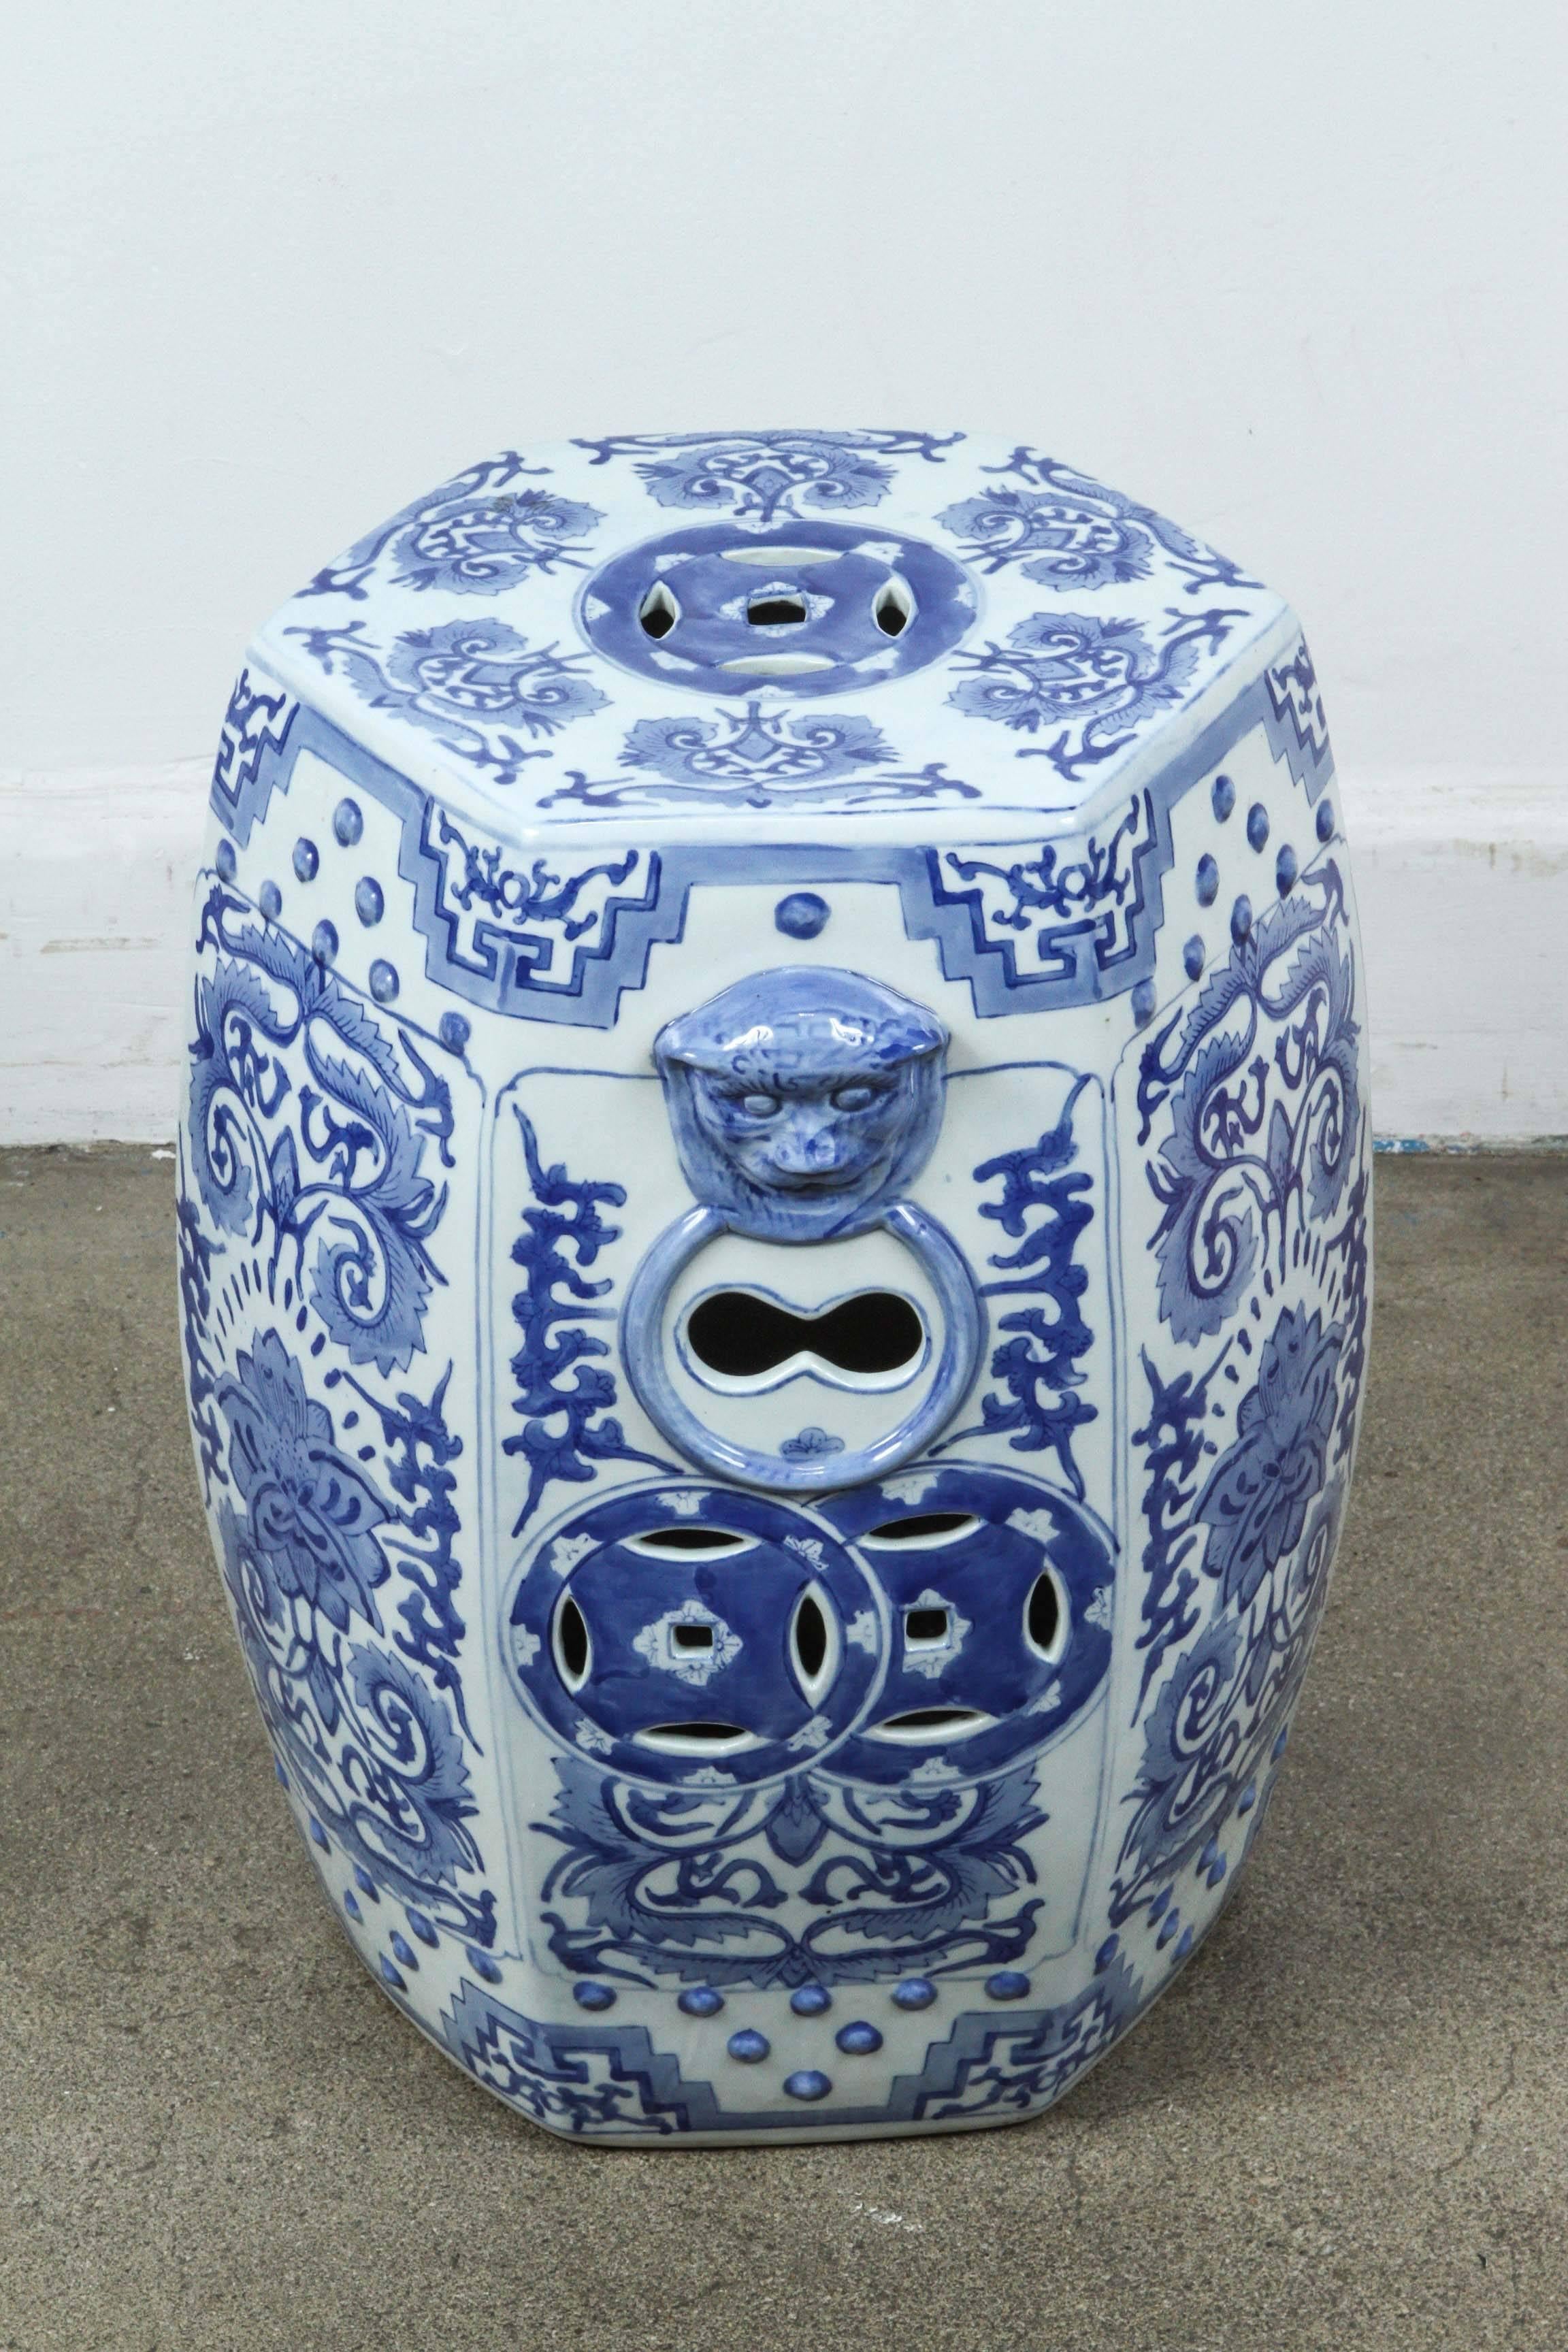 Handcrafted gorgeous white and blue Chinese ceramic garden stool with hand-painted striking chinoiserie art work.
Great to use indoor or outdoors.
Light and easy to carry around.
Top and bottom diameter is 12